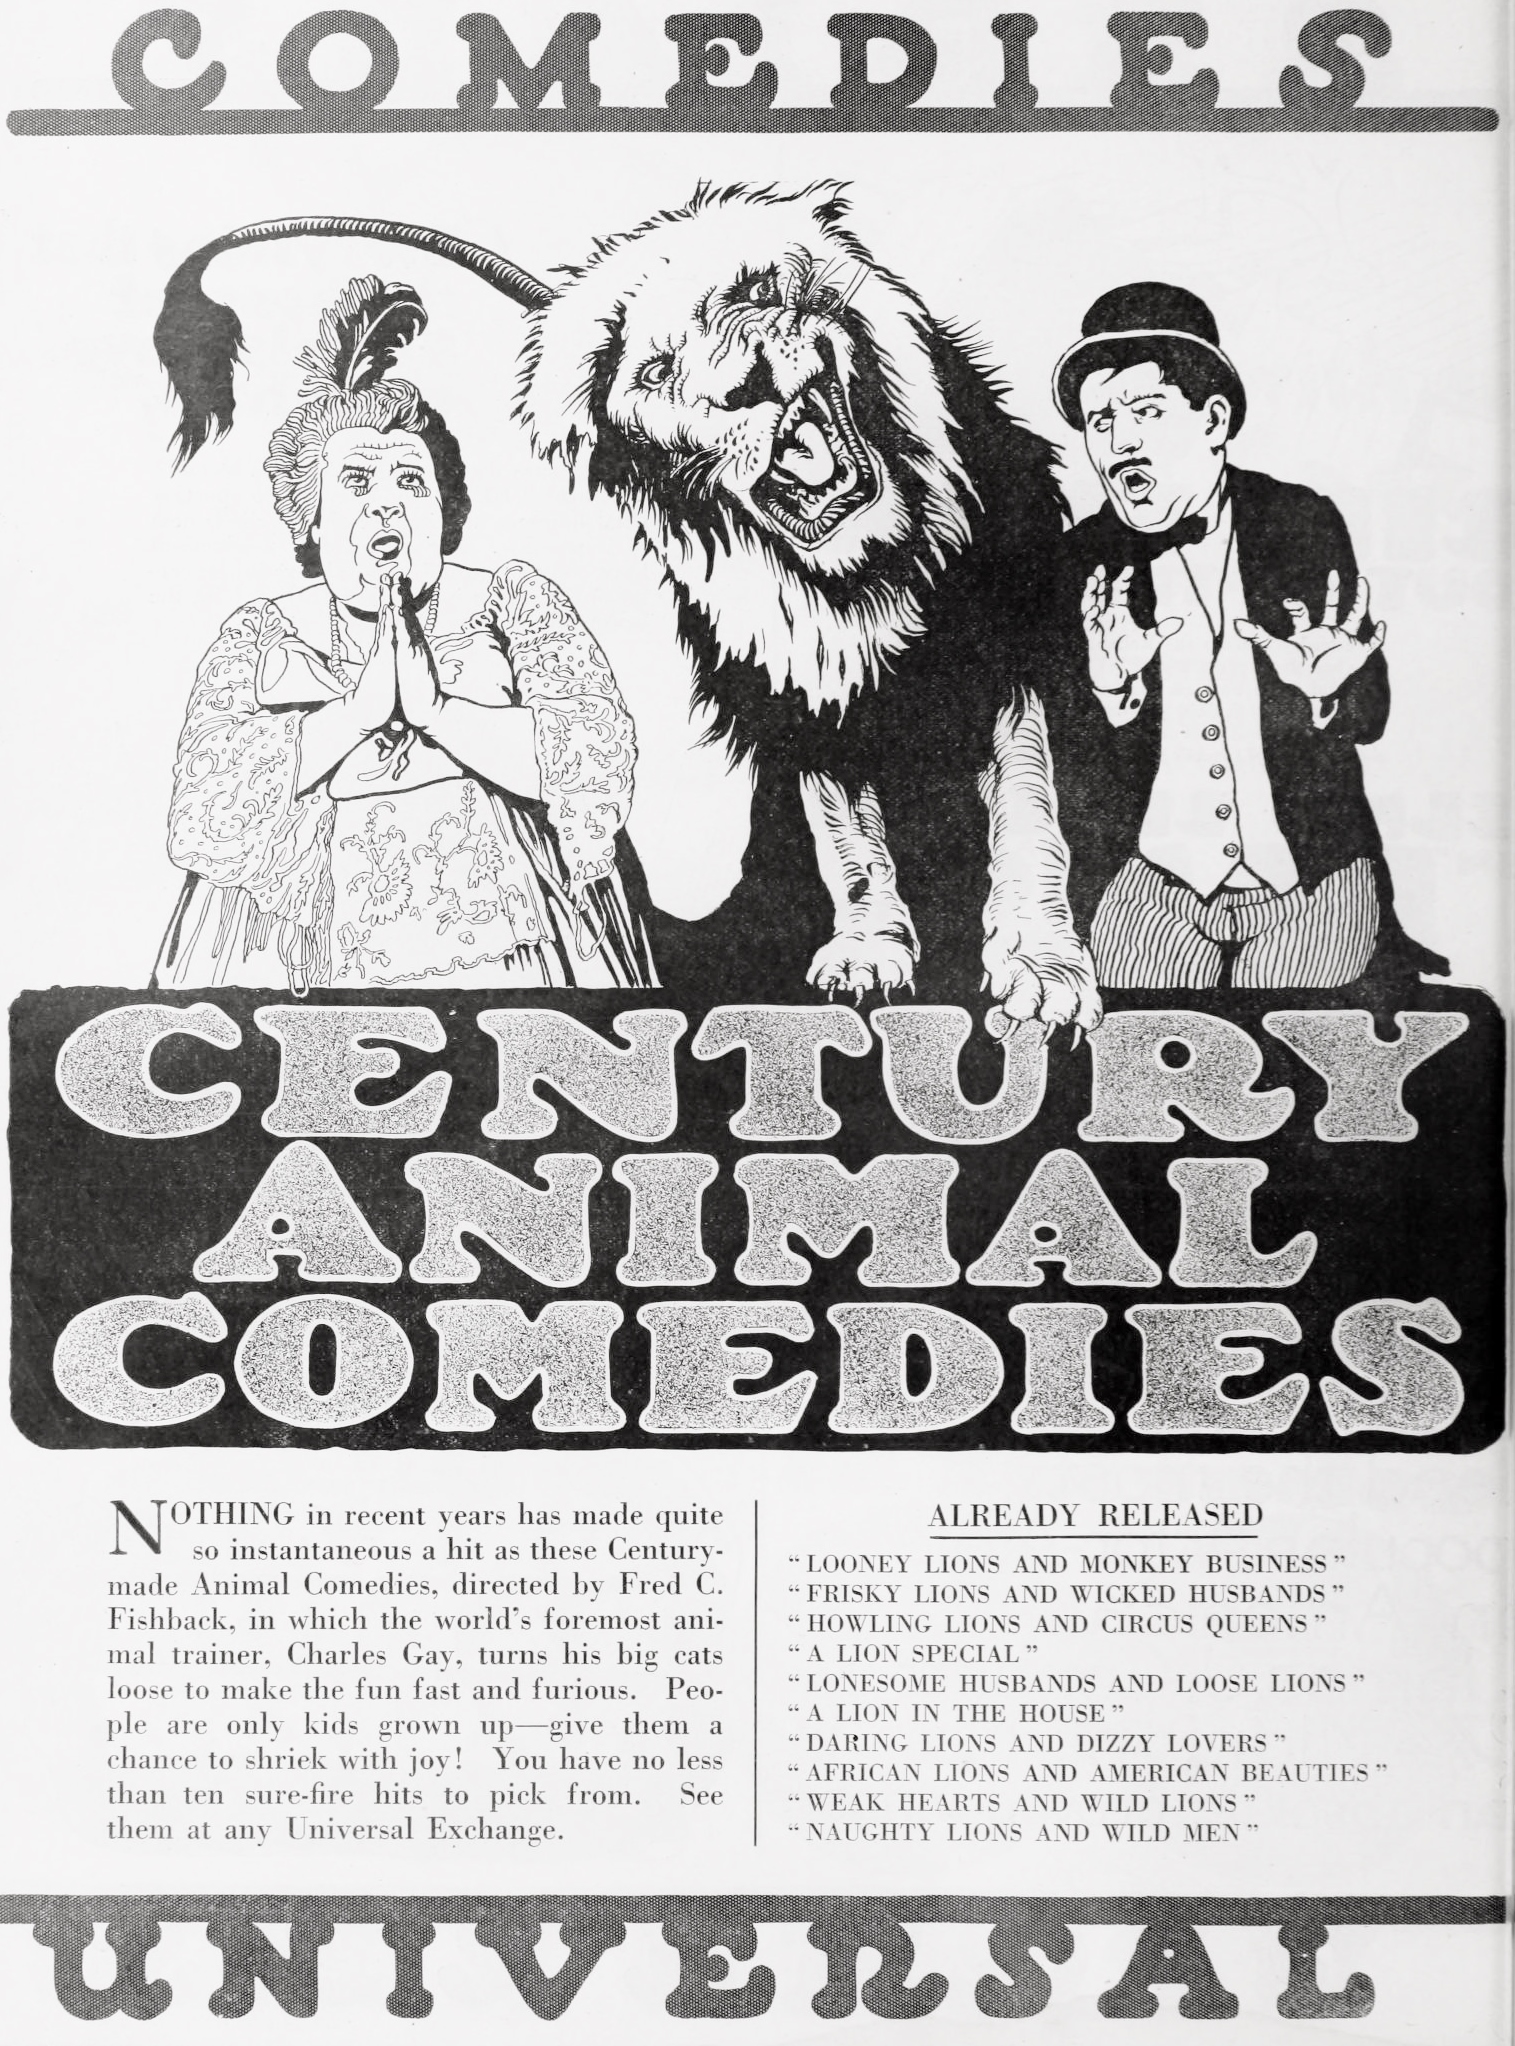 Weak Hearts and Wild Lions (1919)